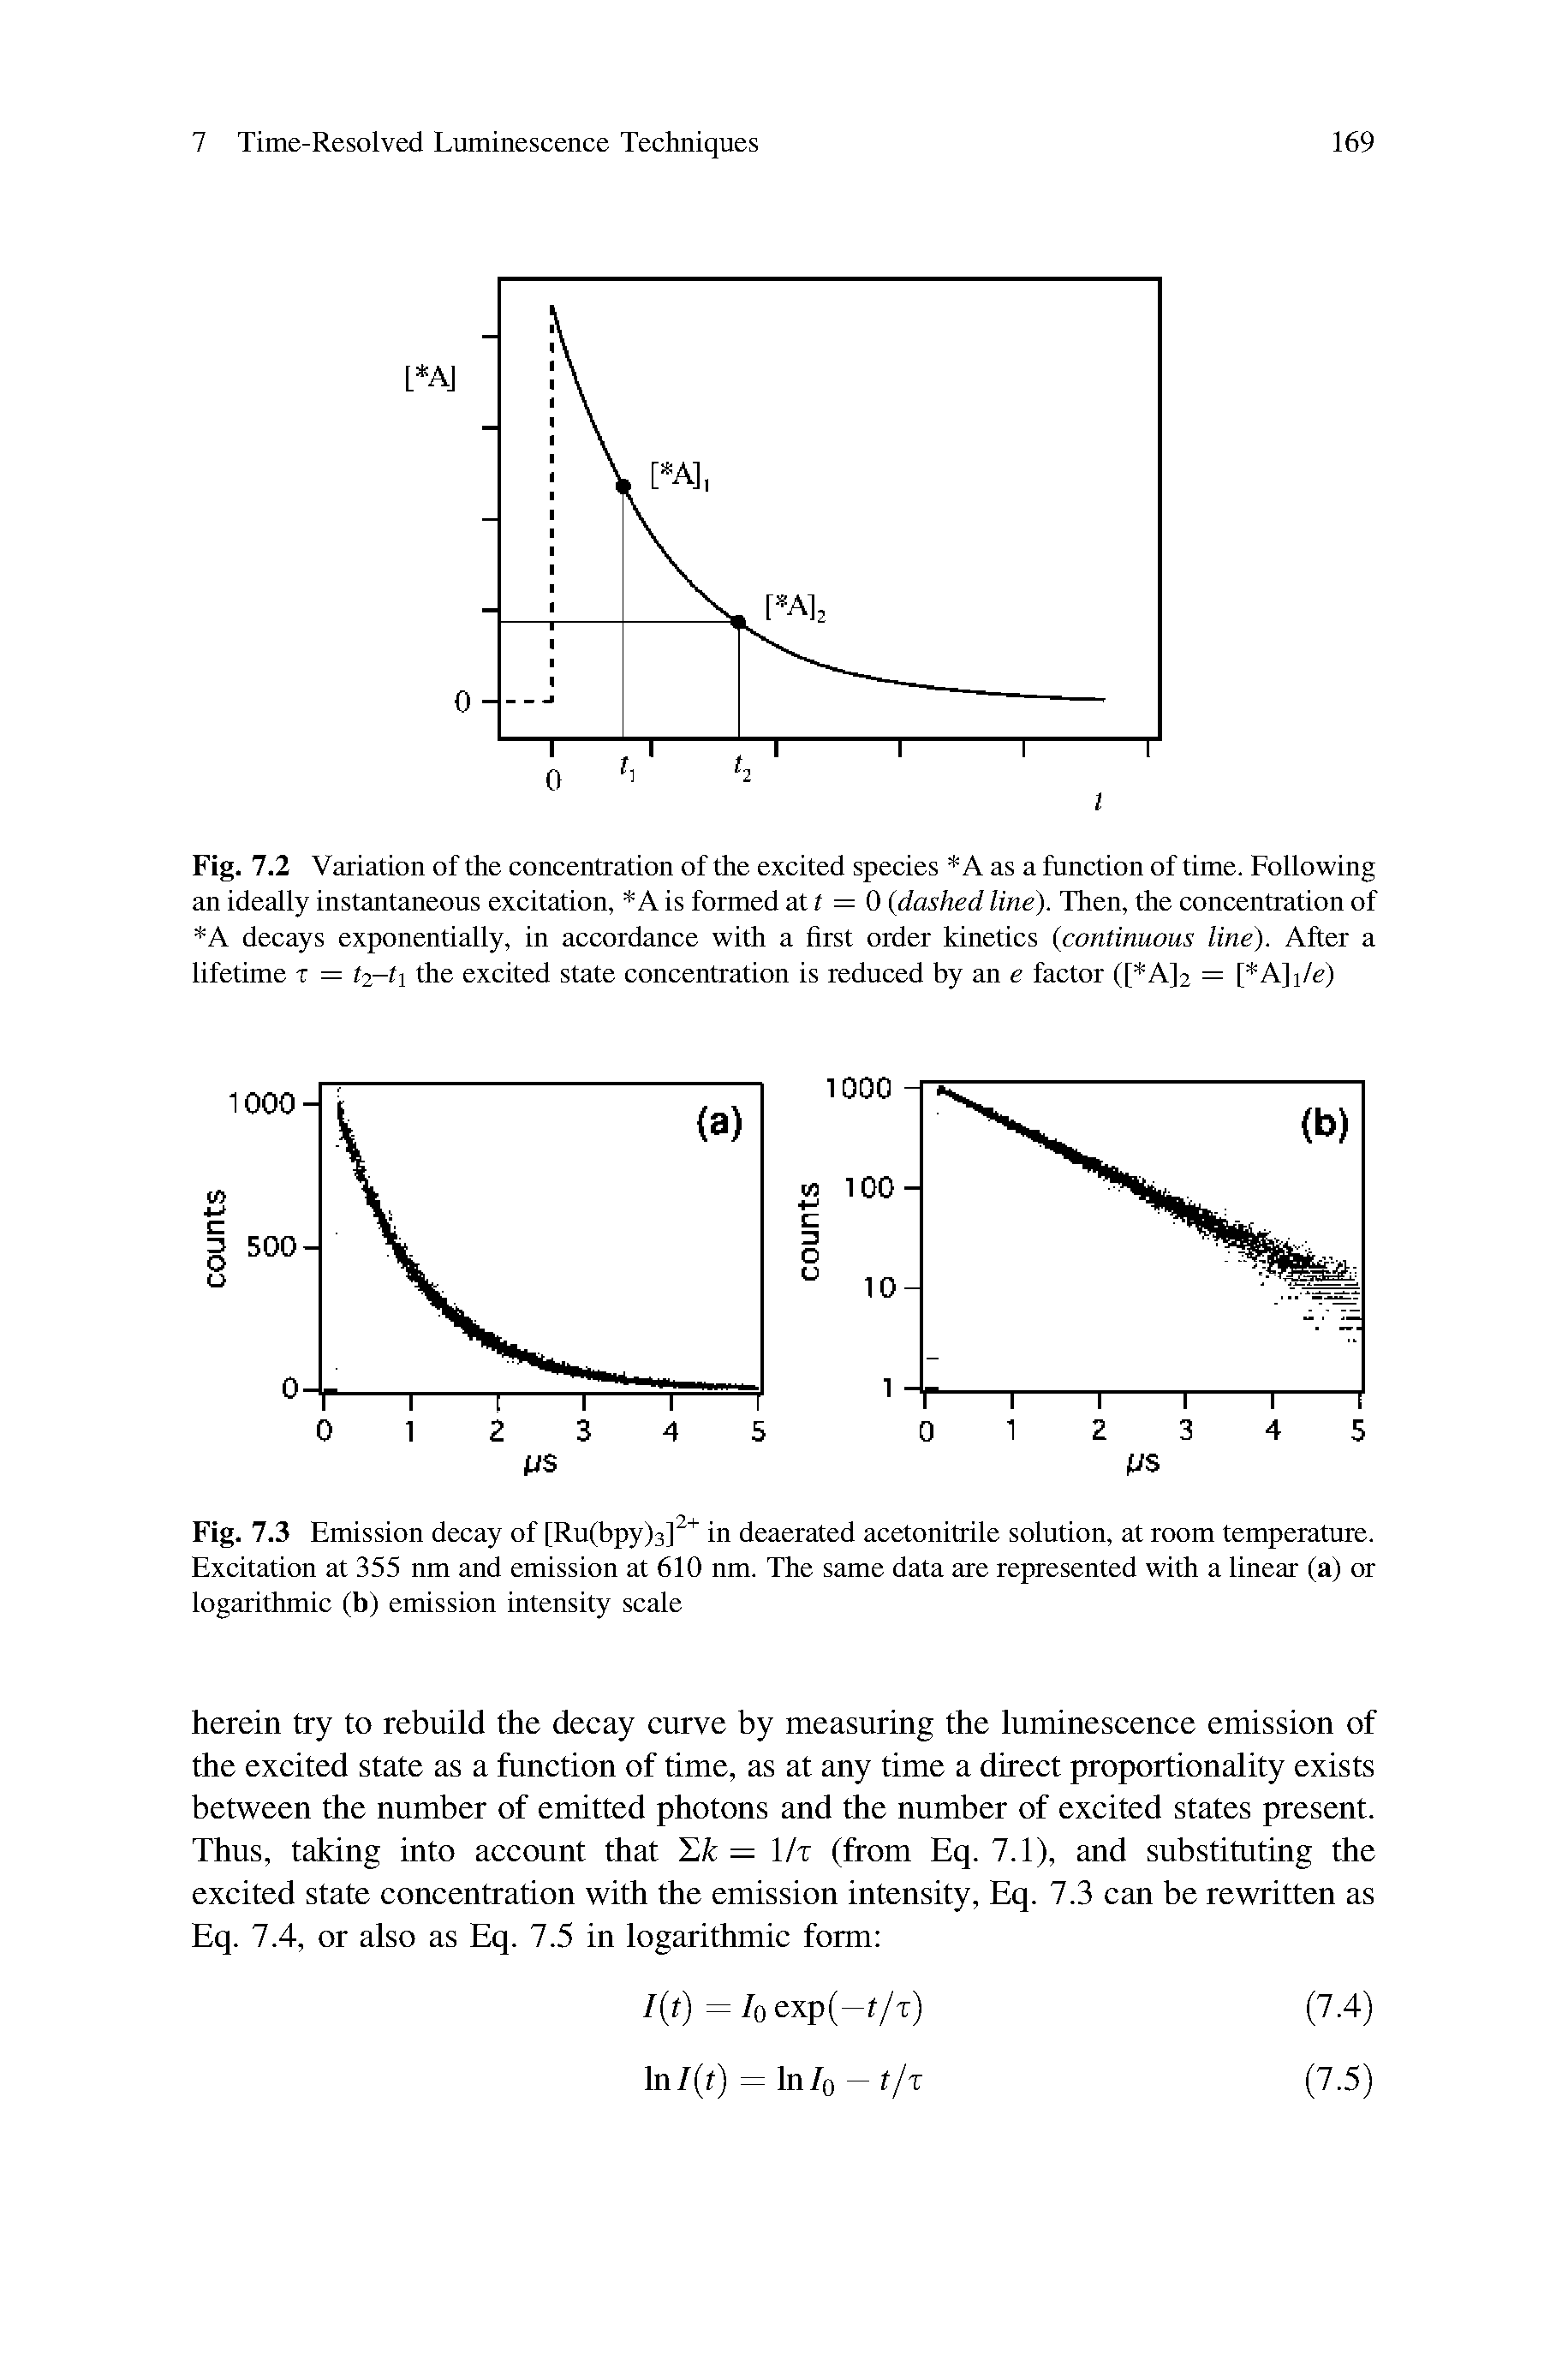 Fig. 7.2 Variation of the concentration of the excited species A as a function of time. Following an ideally instantaneous excitation, A is formed at f = 0 (dashed line). Then, the concentration of A decays exponentially, in accordance with a first order kinetics (continuous line). After a lifetime t = t2-t the excited state concentration is reduced by an e factor ([ A]2 = [ A]i/e)...